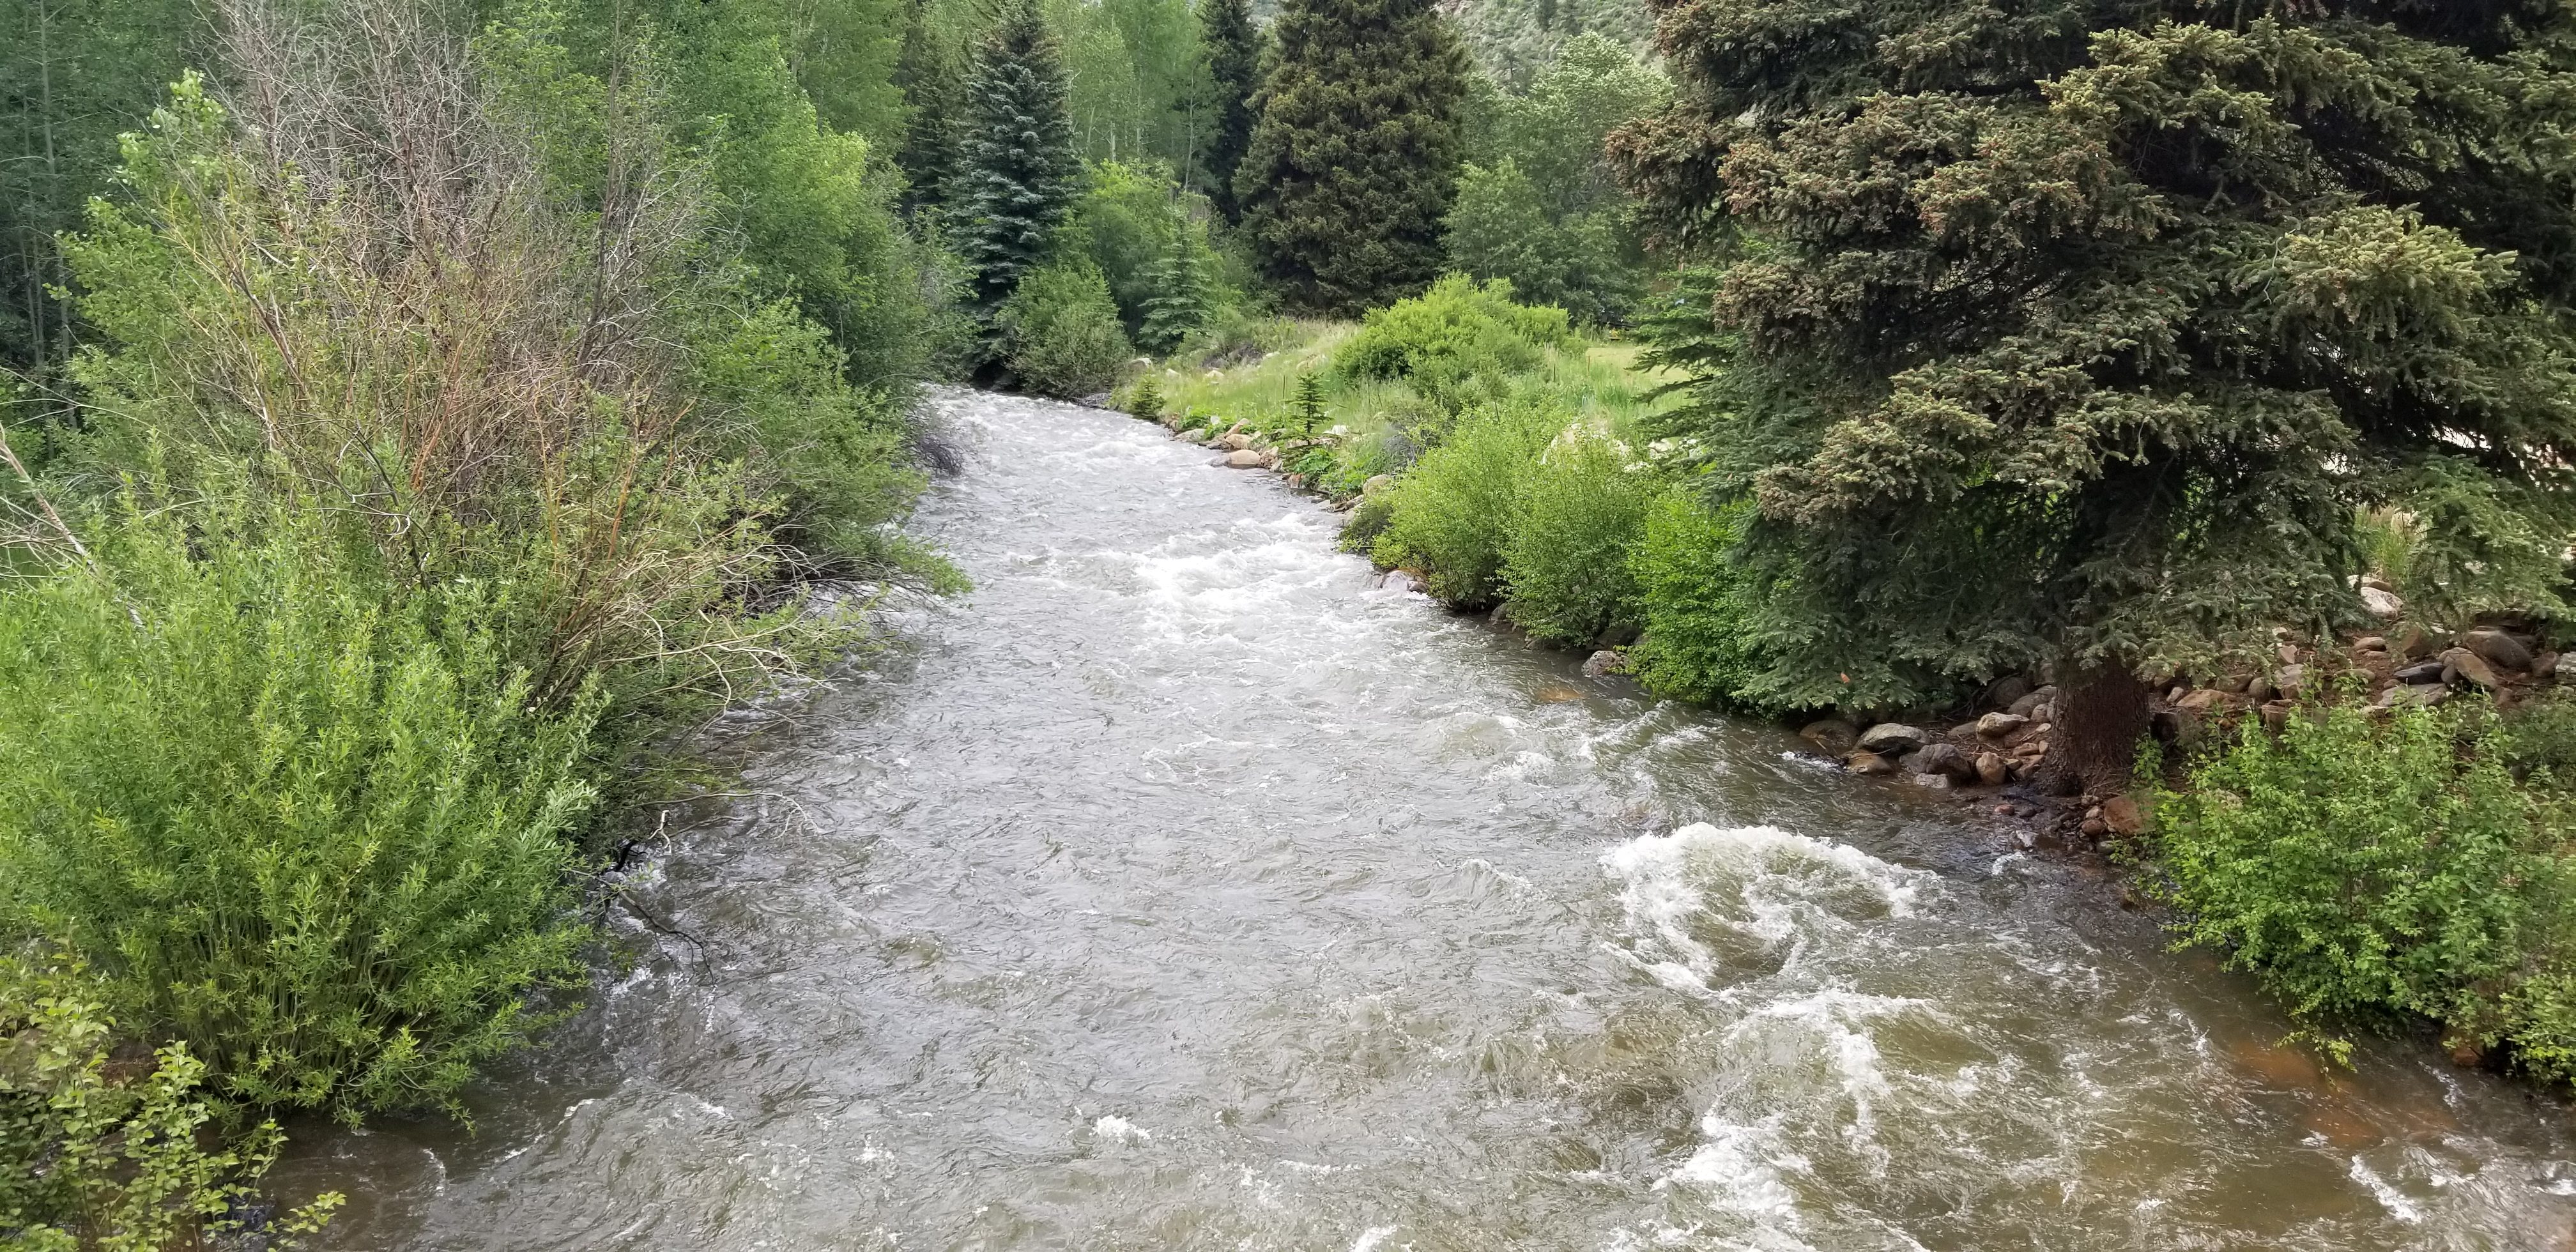 Geneva Creek, a major tributary to the North Fork, boosts the river's flows near Grant.